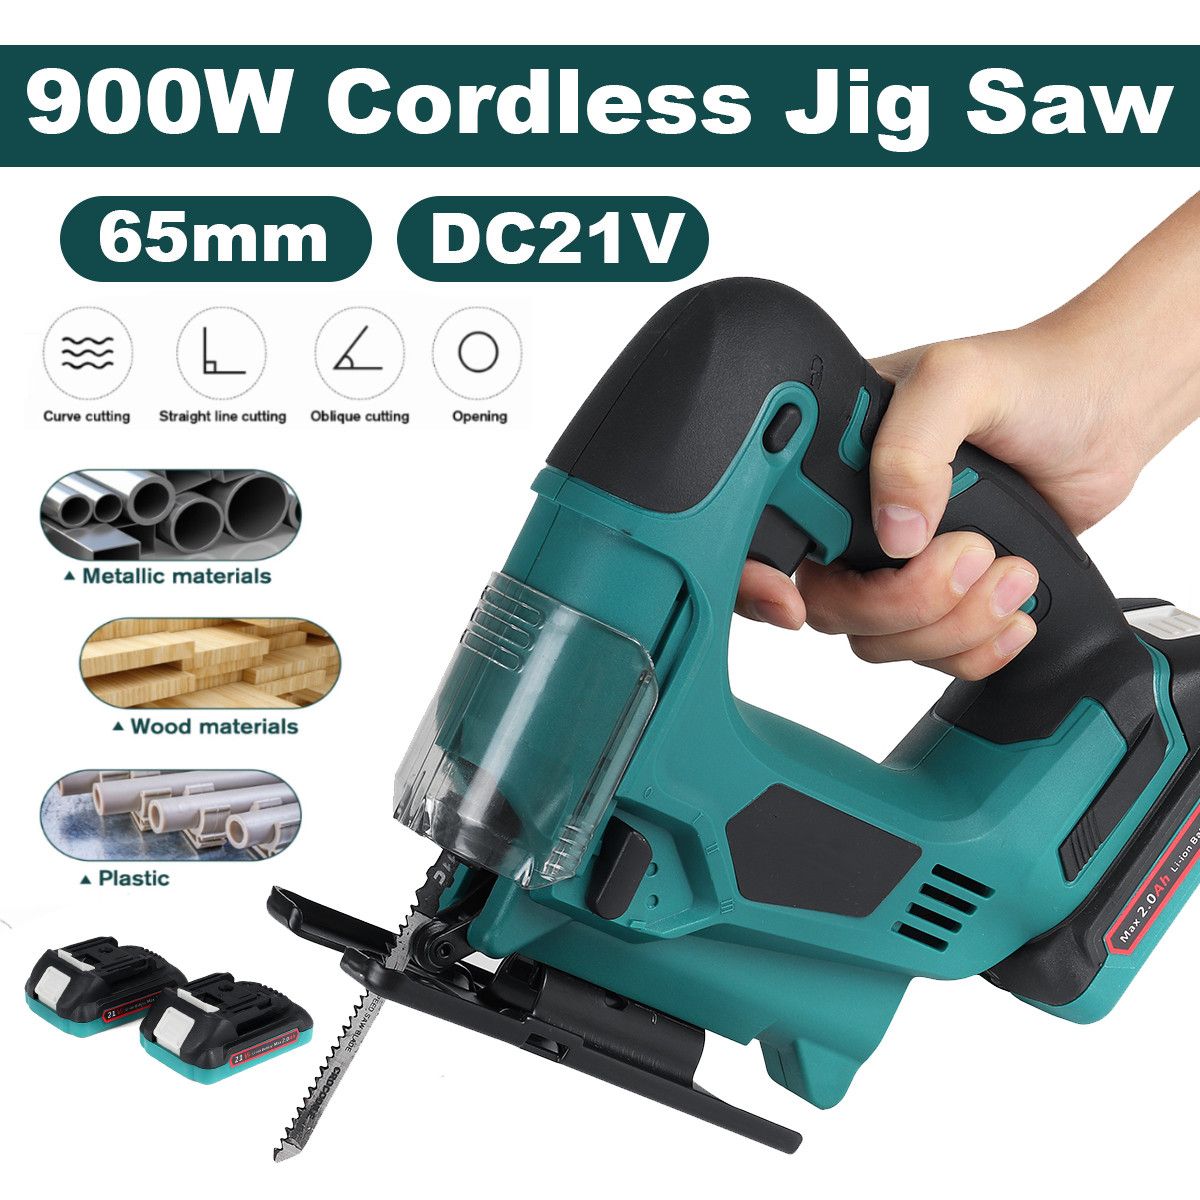 21V-900W-Electric-Jig-Saw-Power-Tool-Cordless-Quick-Blade-Change-Electric-Saw-LED-Light-with-Recharg-1746815